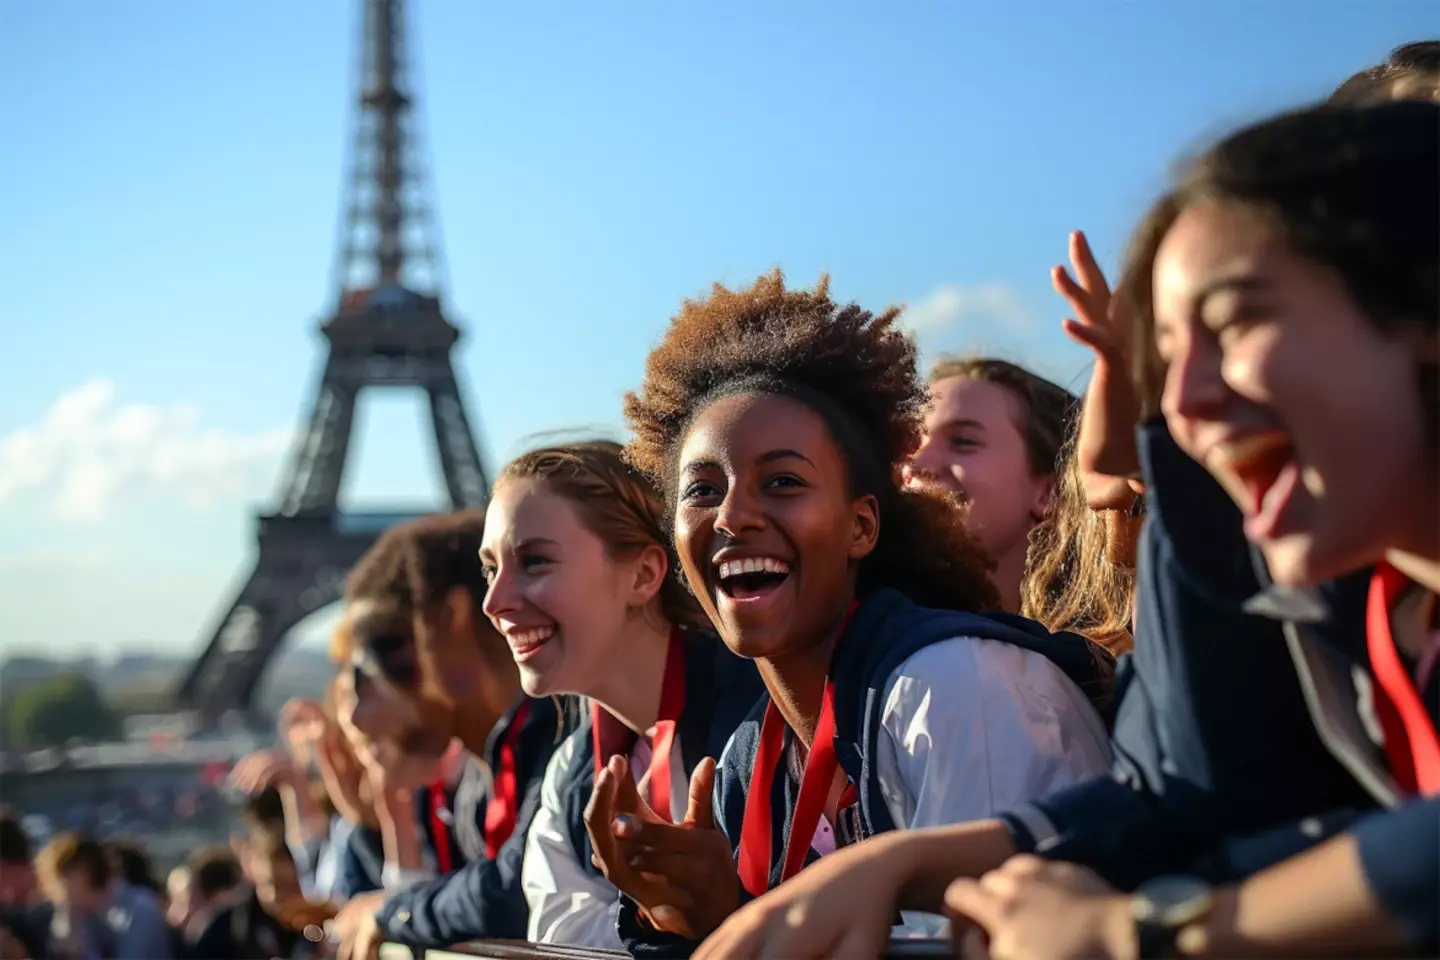 Enthusiastic fans cheering at a landmark event, with the Eiffel Tower in the background, symbolizing the excitement around major sporting events in France in 2024.